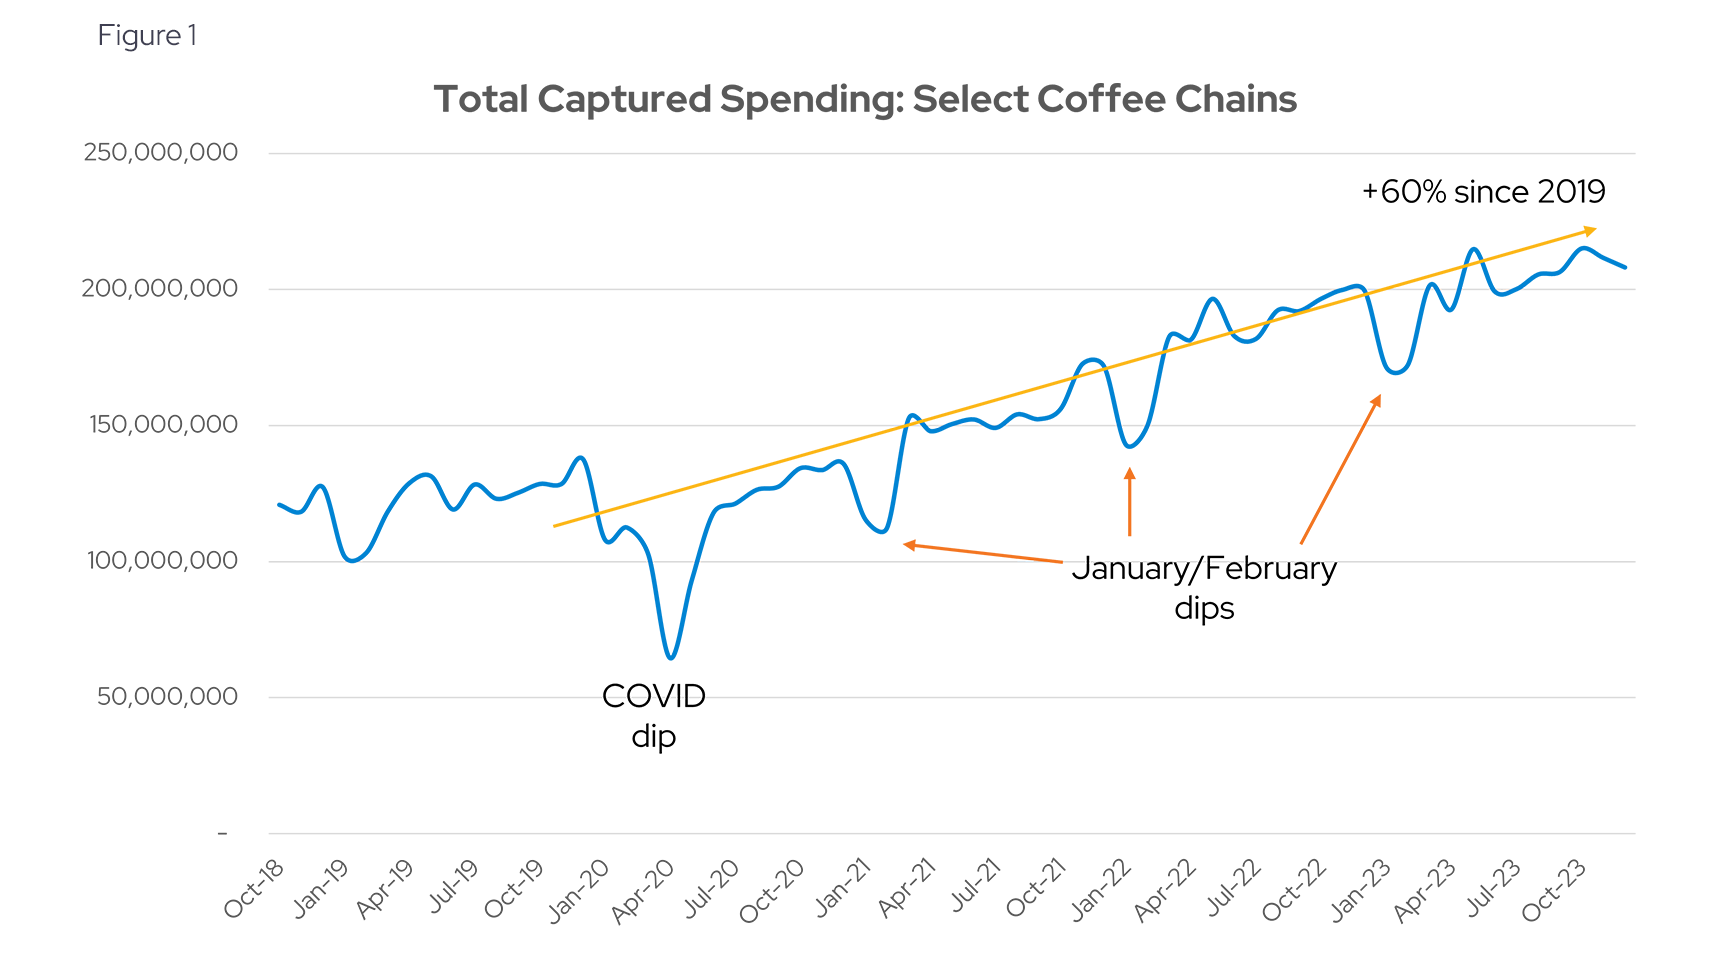 Total Captured Spending: Select Coffee Chains